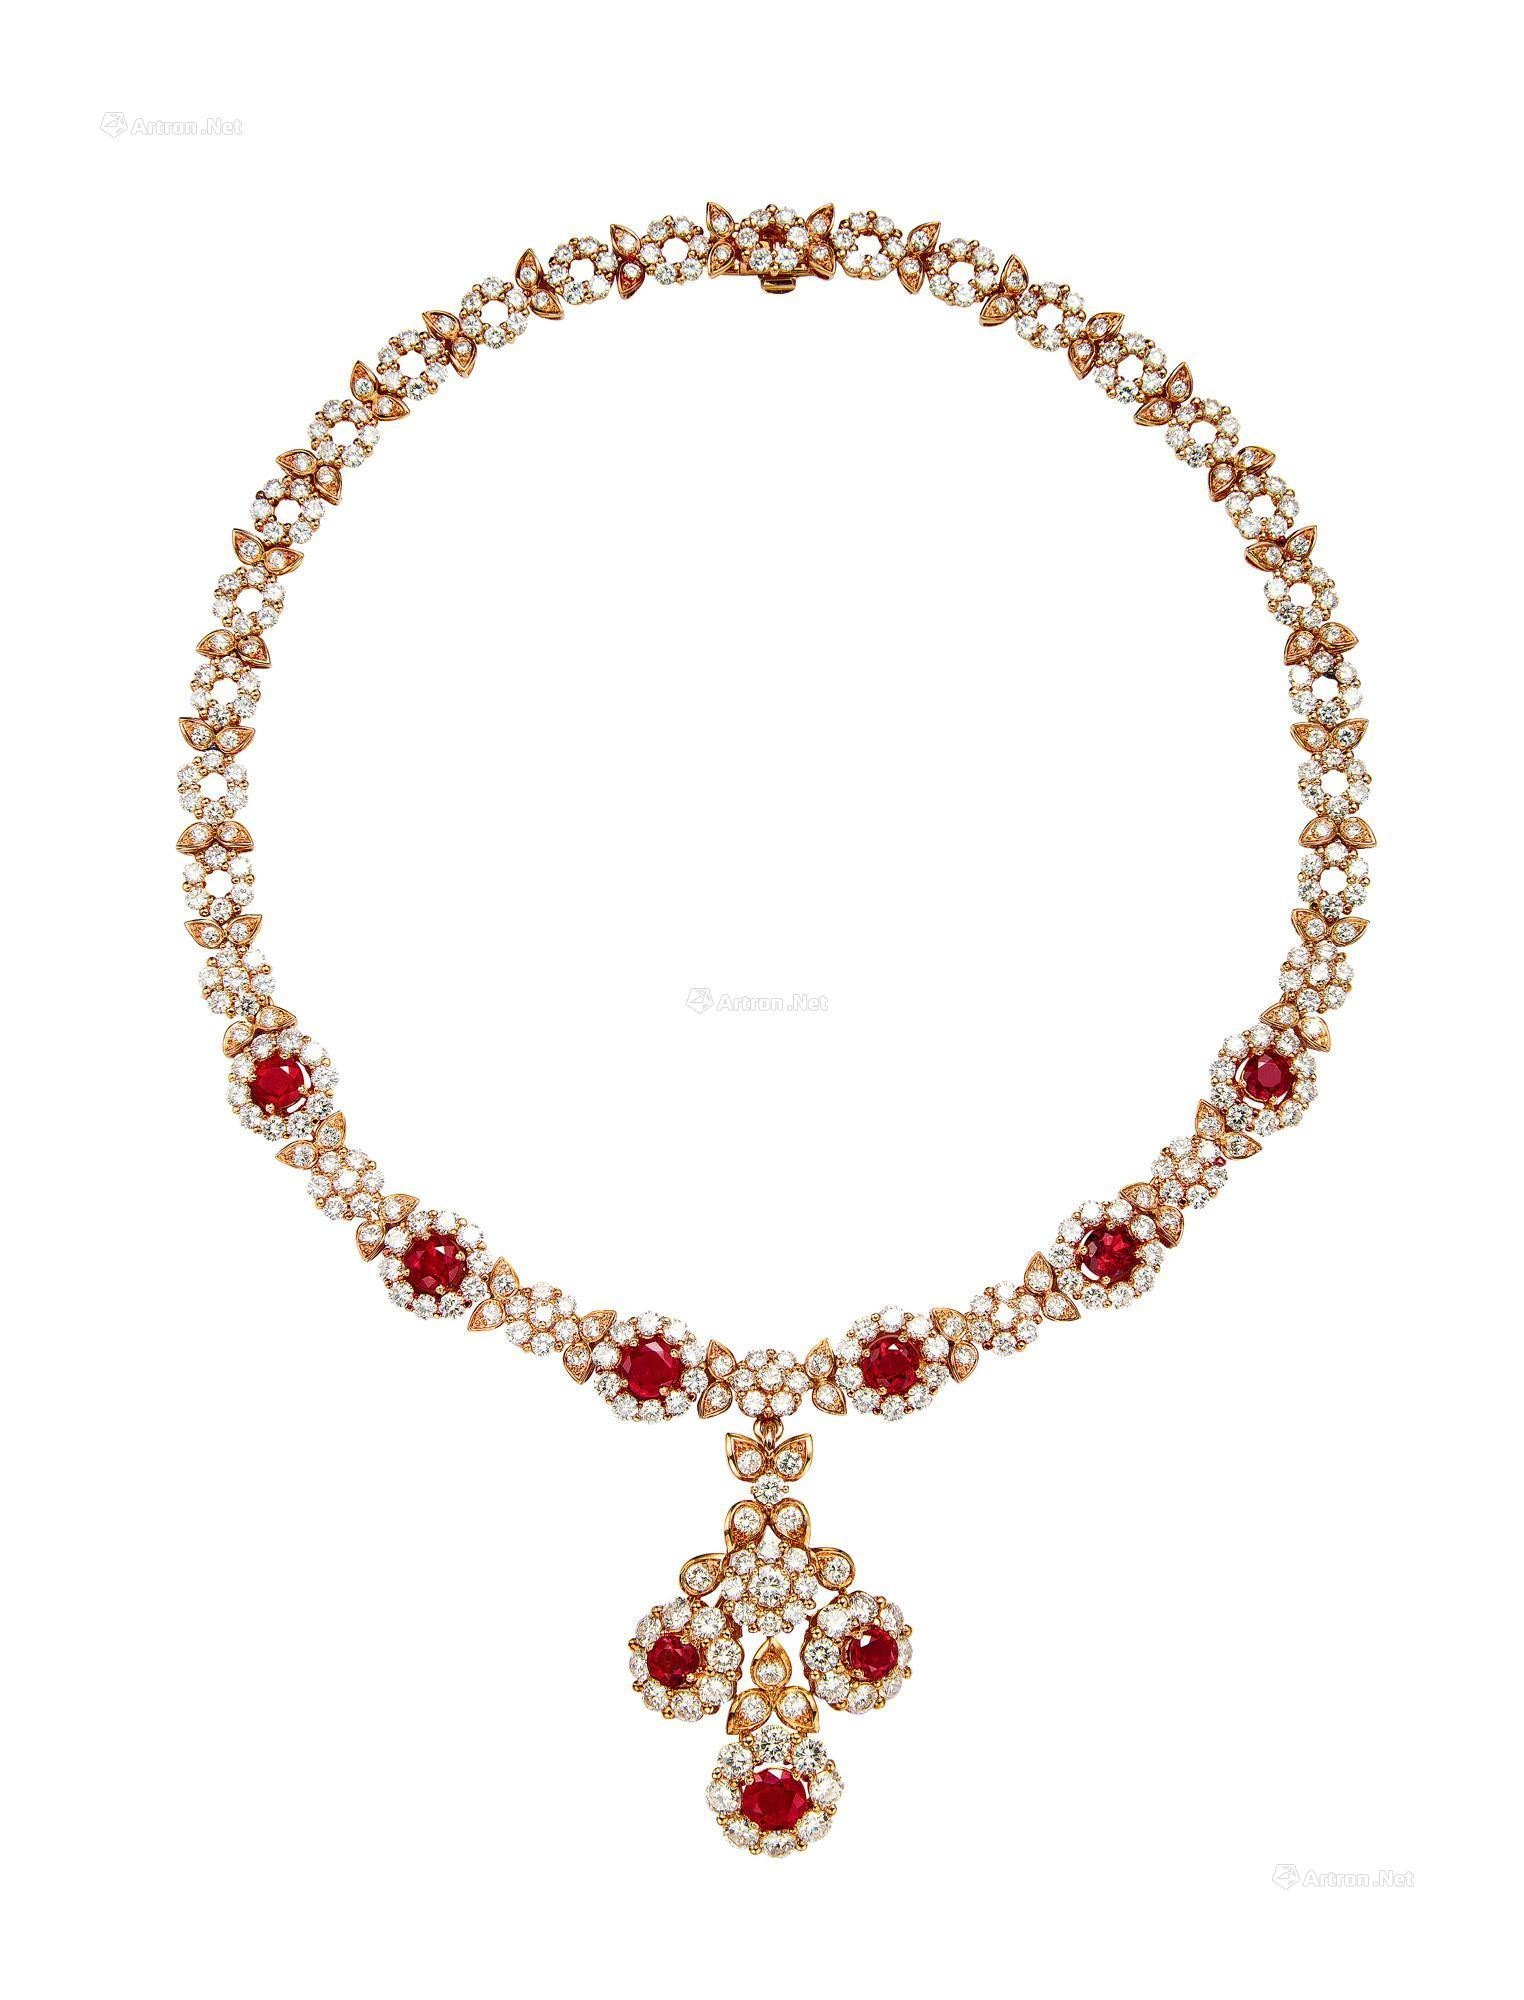 A RUBY AND DIAMOND NECKLACE， BY CHAUMET